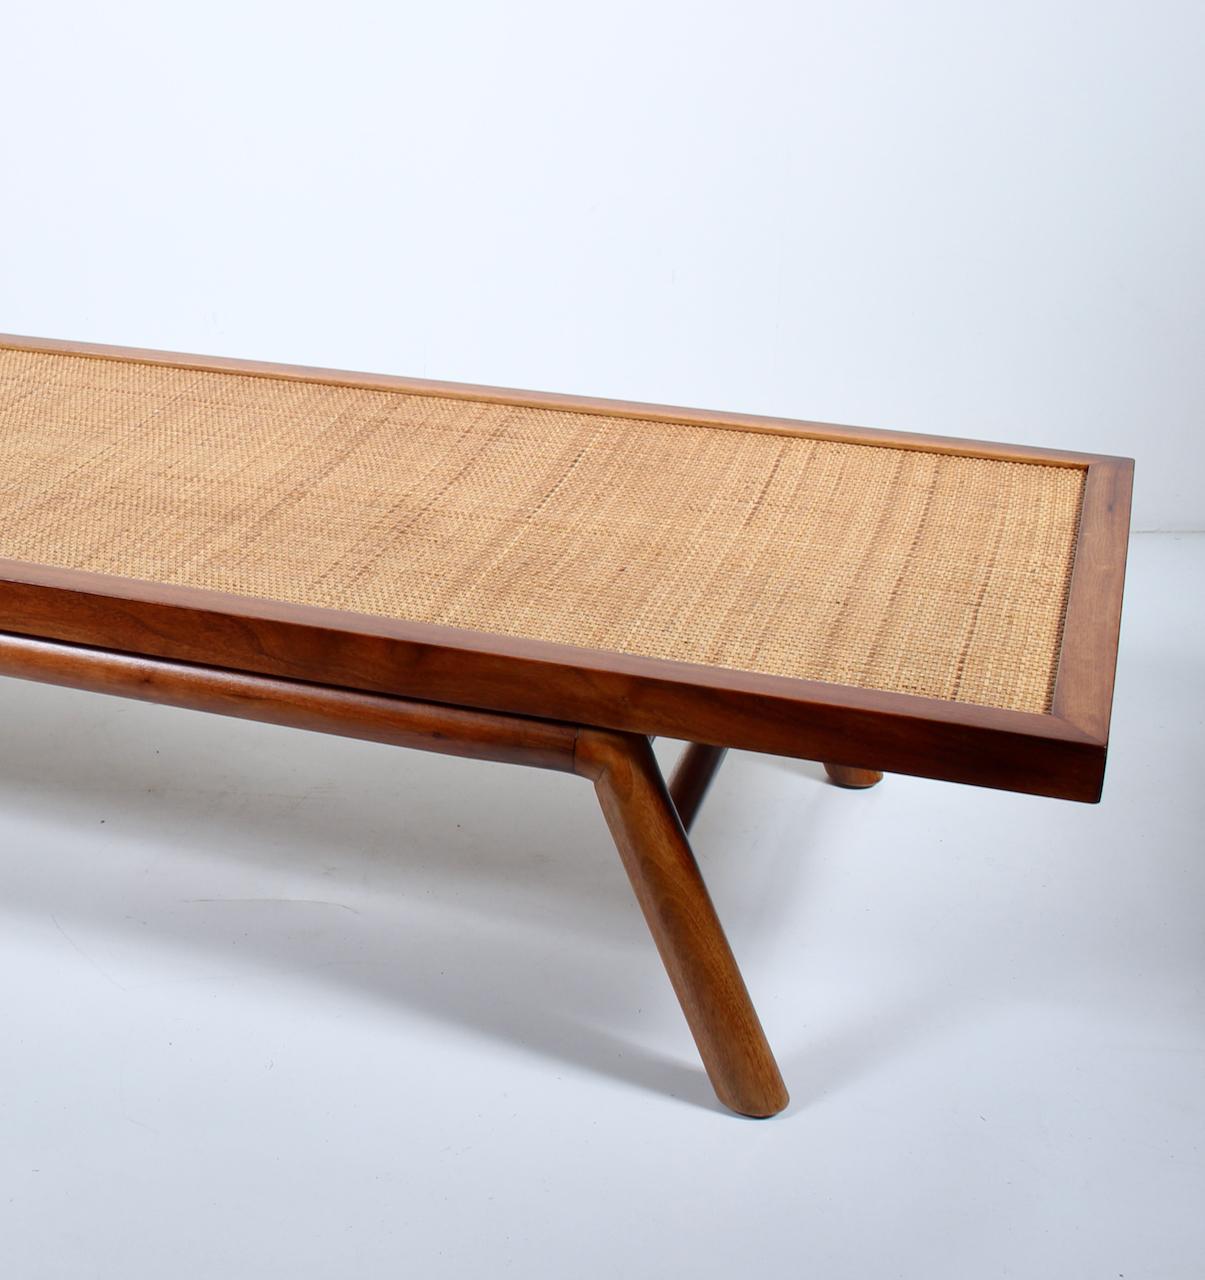 Mid-20th Century T. H. Robsjohn-Gibbings Low Mahogany & Cane Bench, Coffee Table, 1950's For Sale